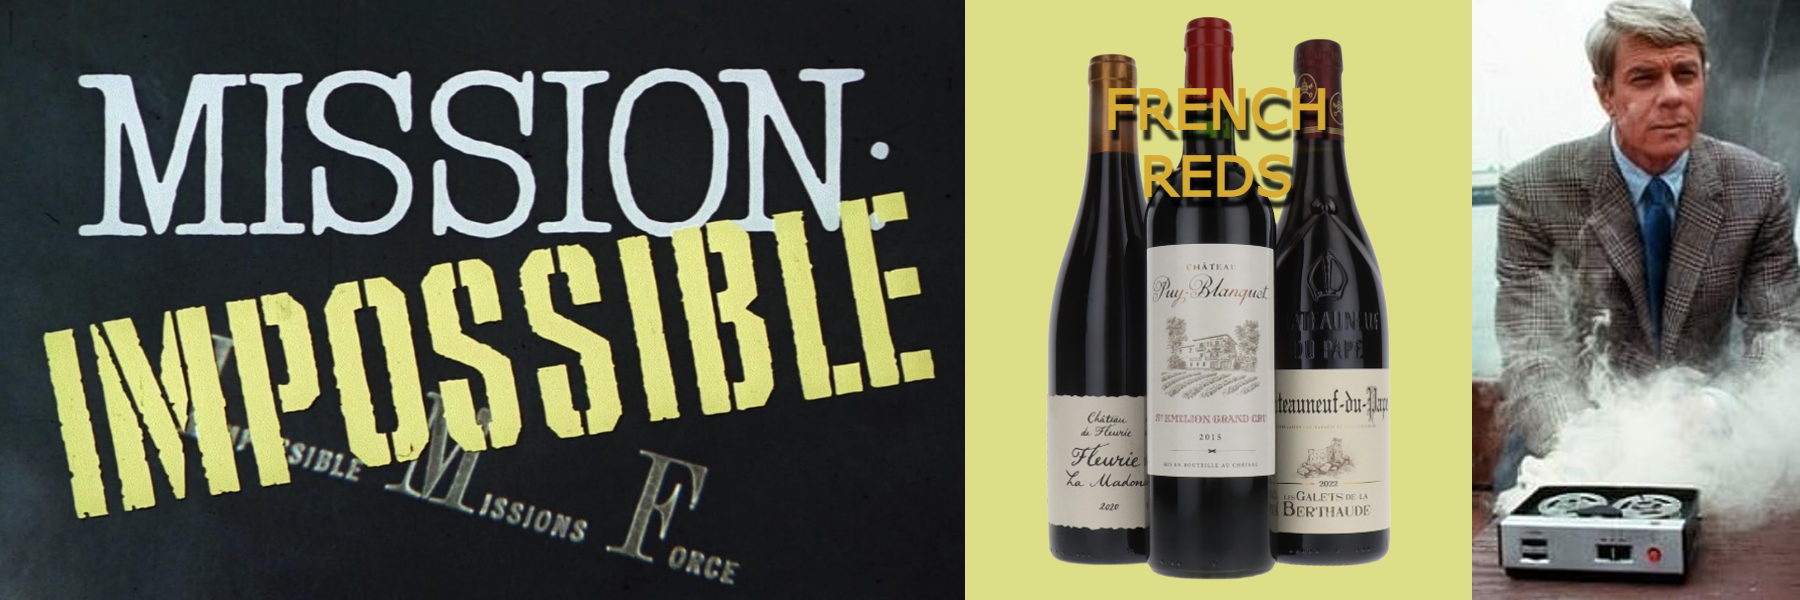 Mission: Impossible ~ Father's Day French Red Selection